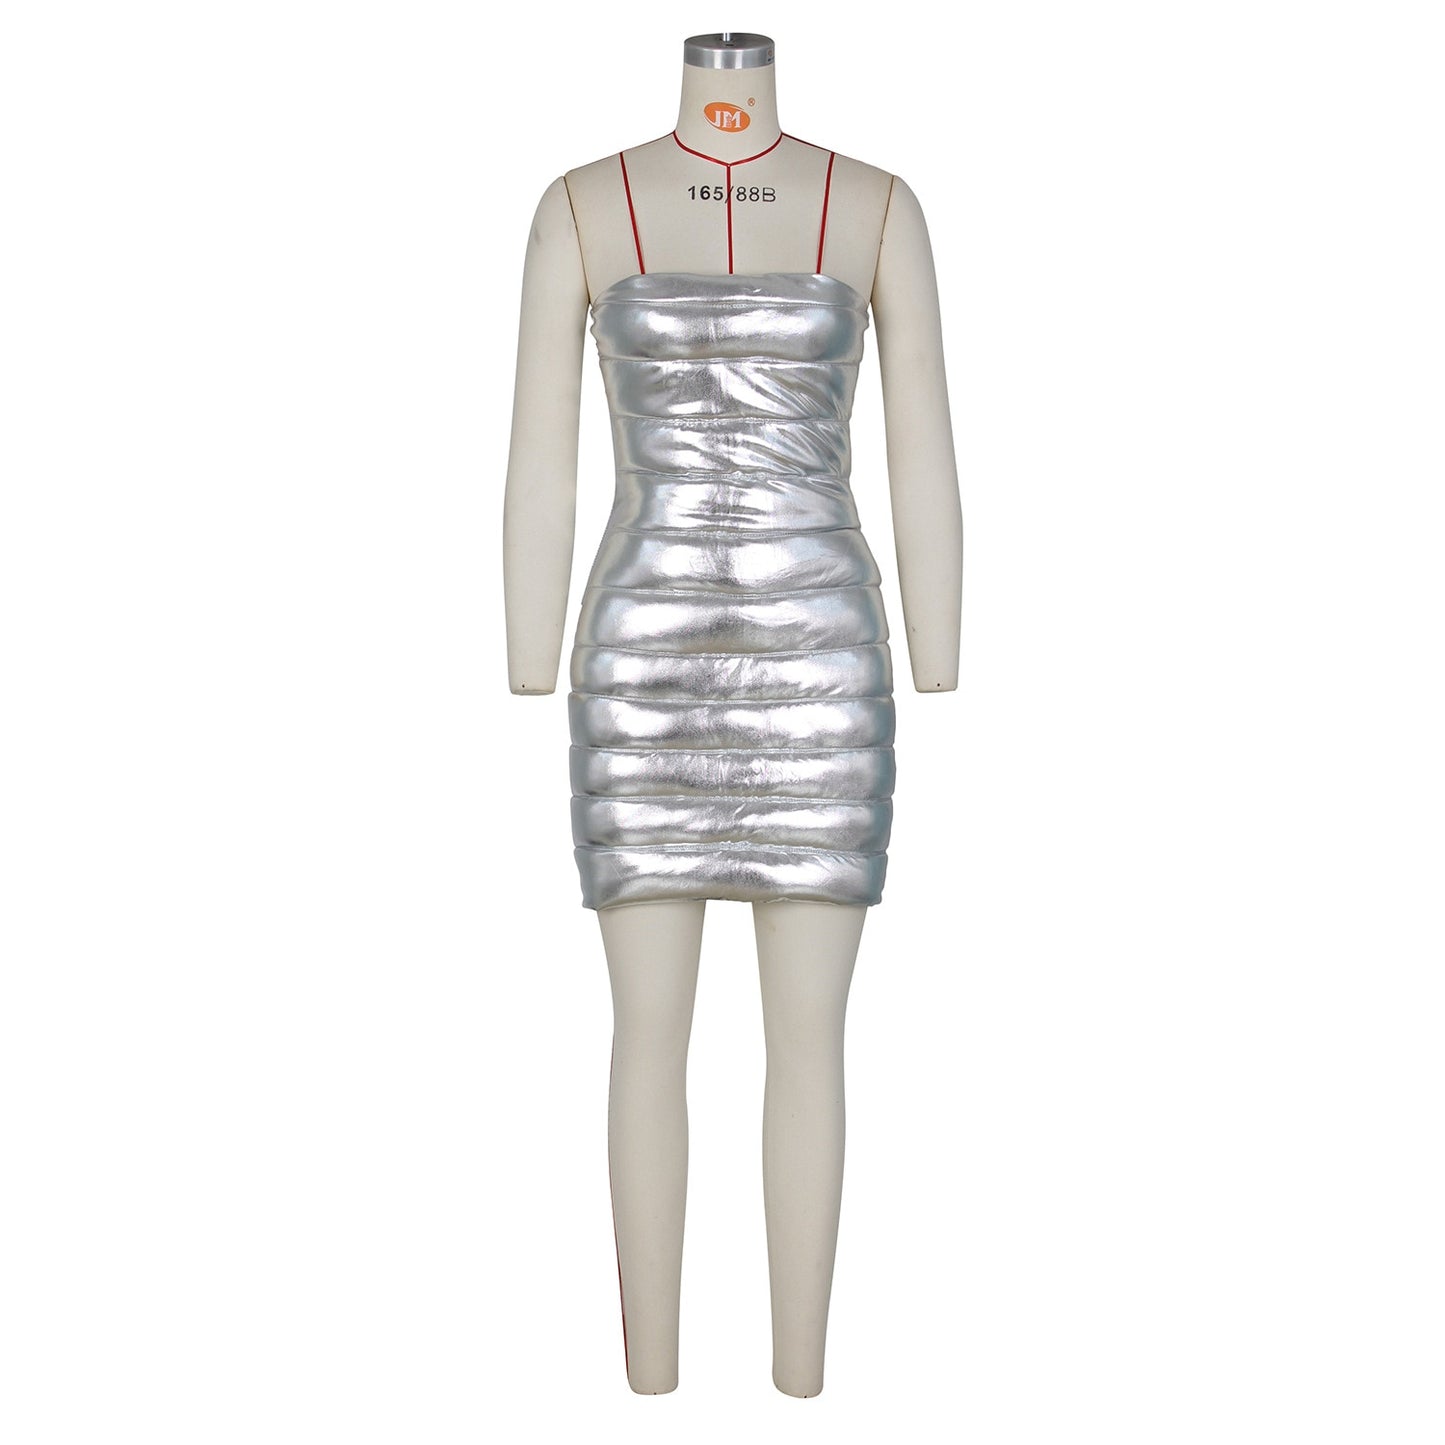 Perl Sparkling Silver Crystals Dress for Women Bright Mirrors Dresses